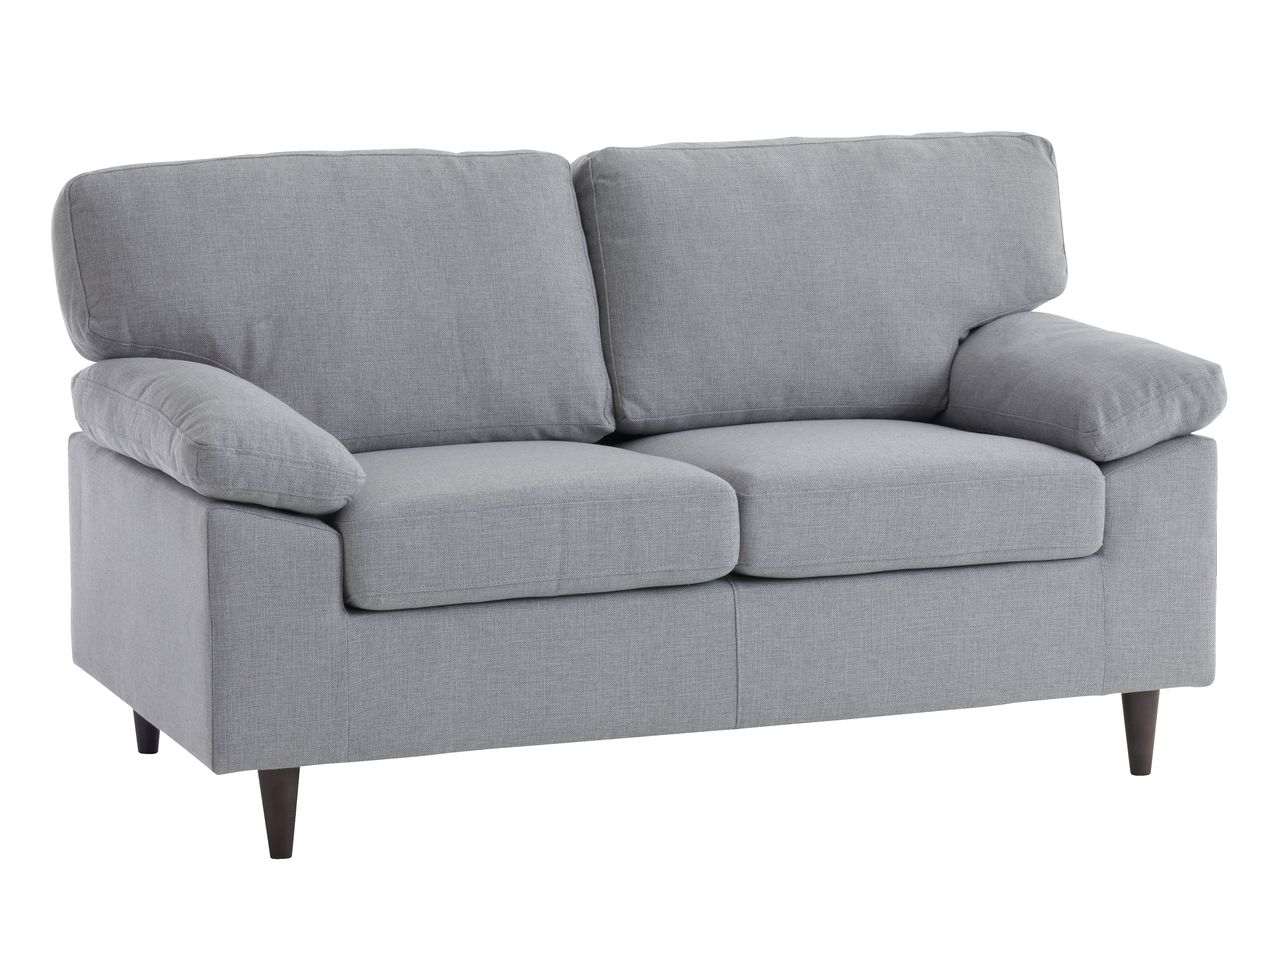 Sofa 2s |GEDVED|polyester fabric cover|light grey|R154xS85xC84cm ...